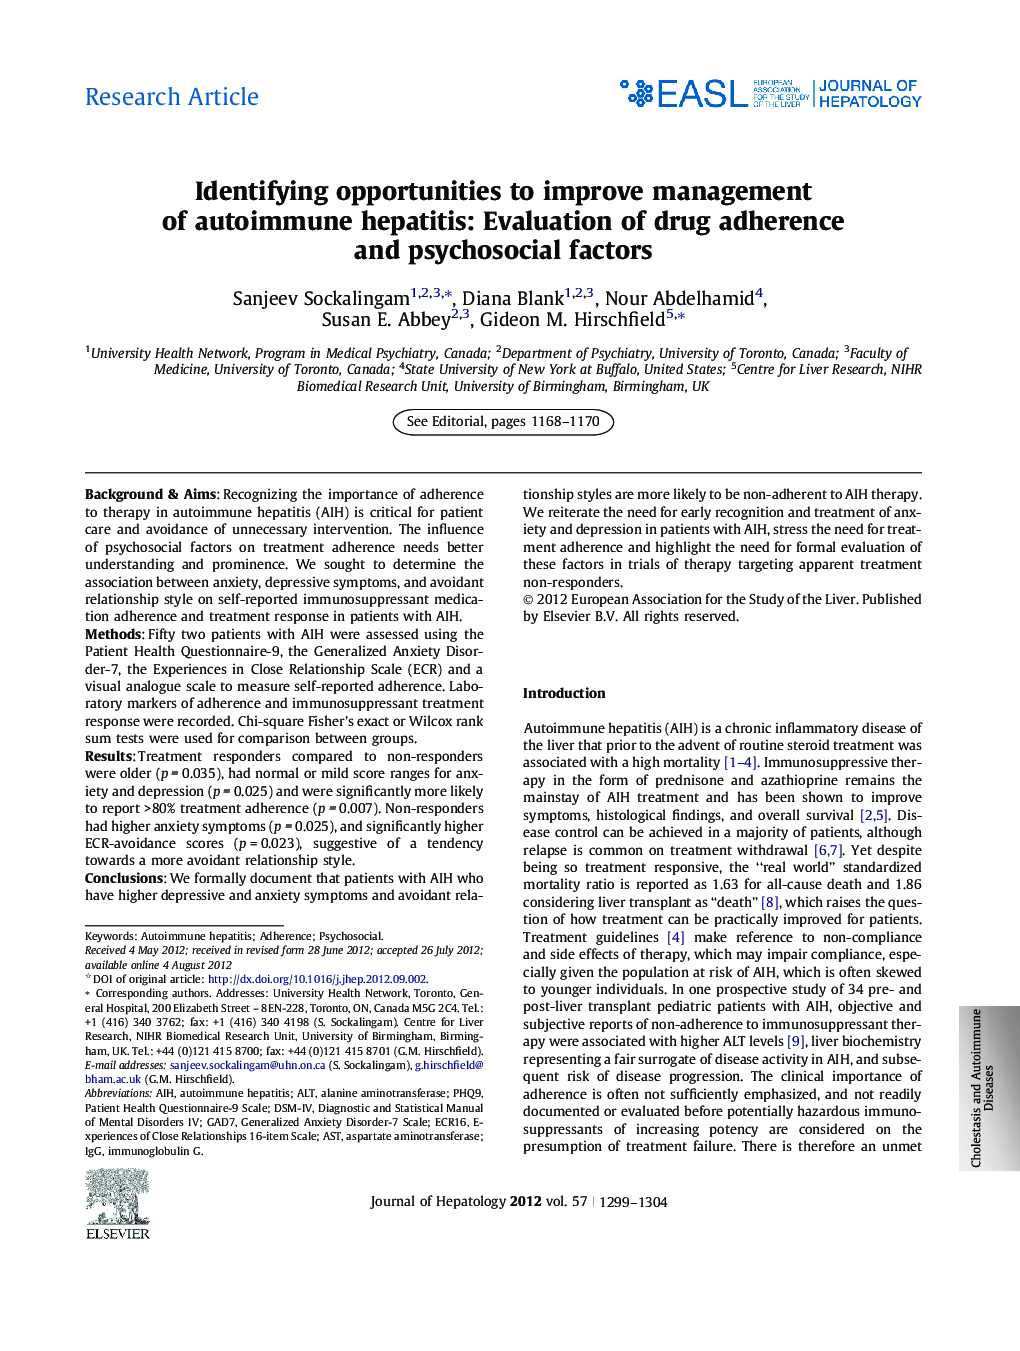 Research ArticleIdentifying opportunities to improve management of autoimmune hepatitis: Evaluation of drug adherence and psychosocial factors